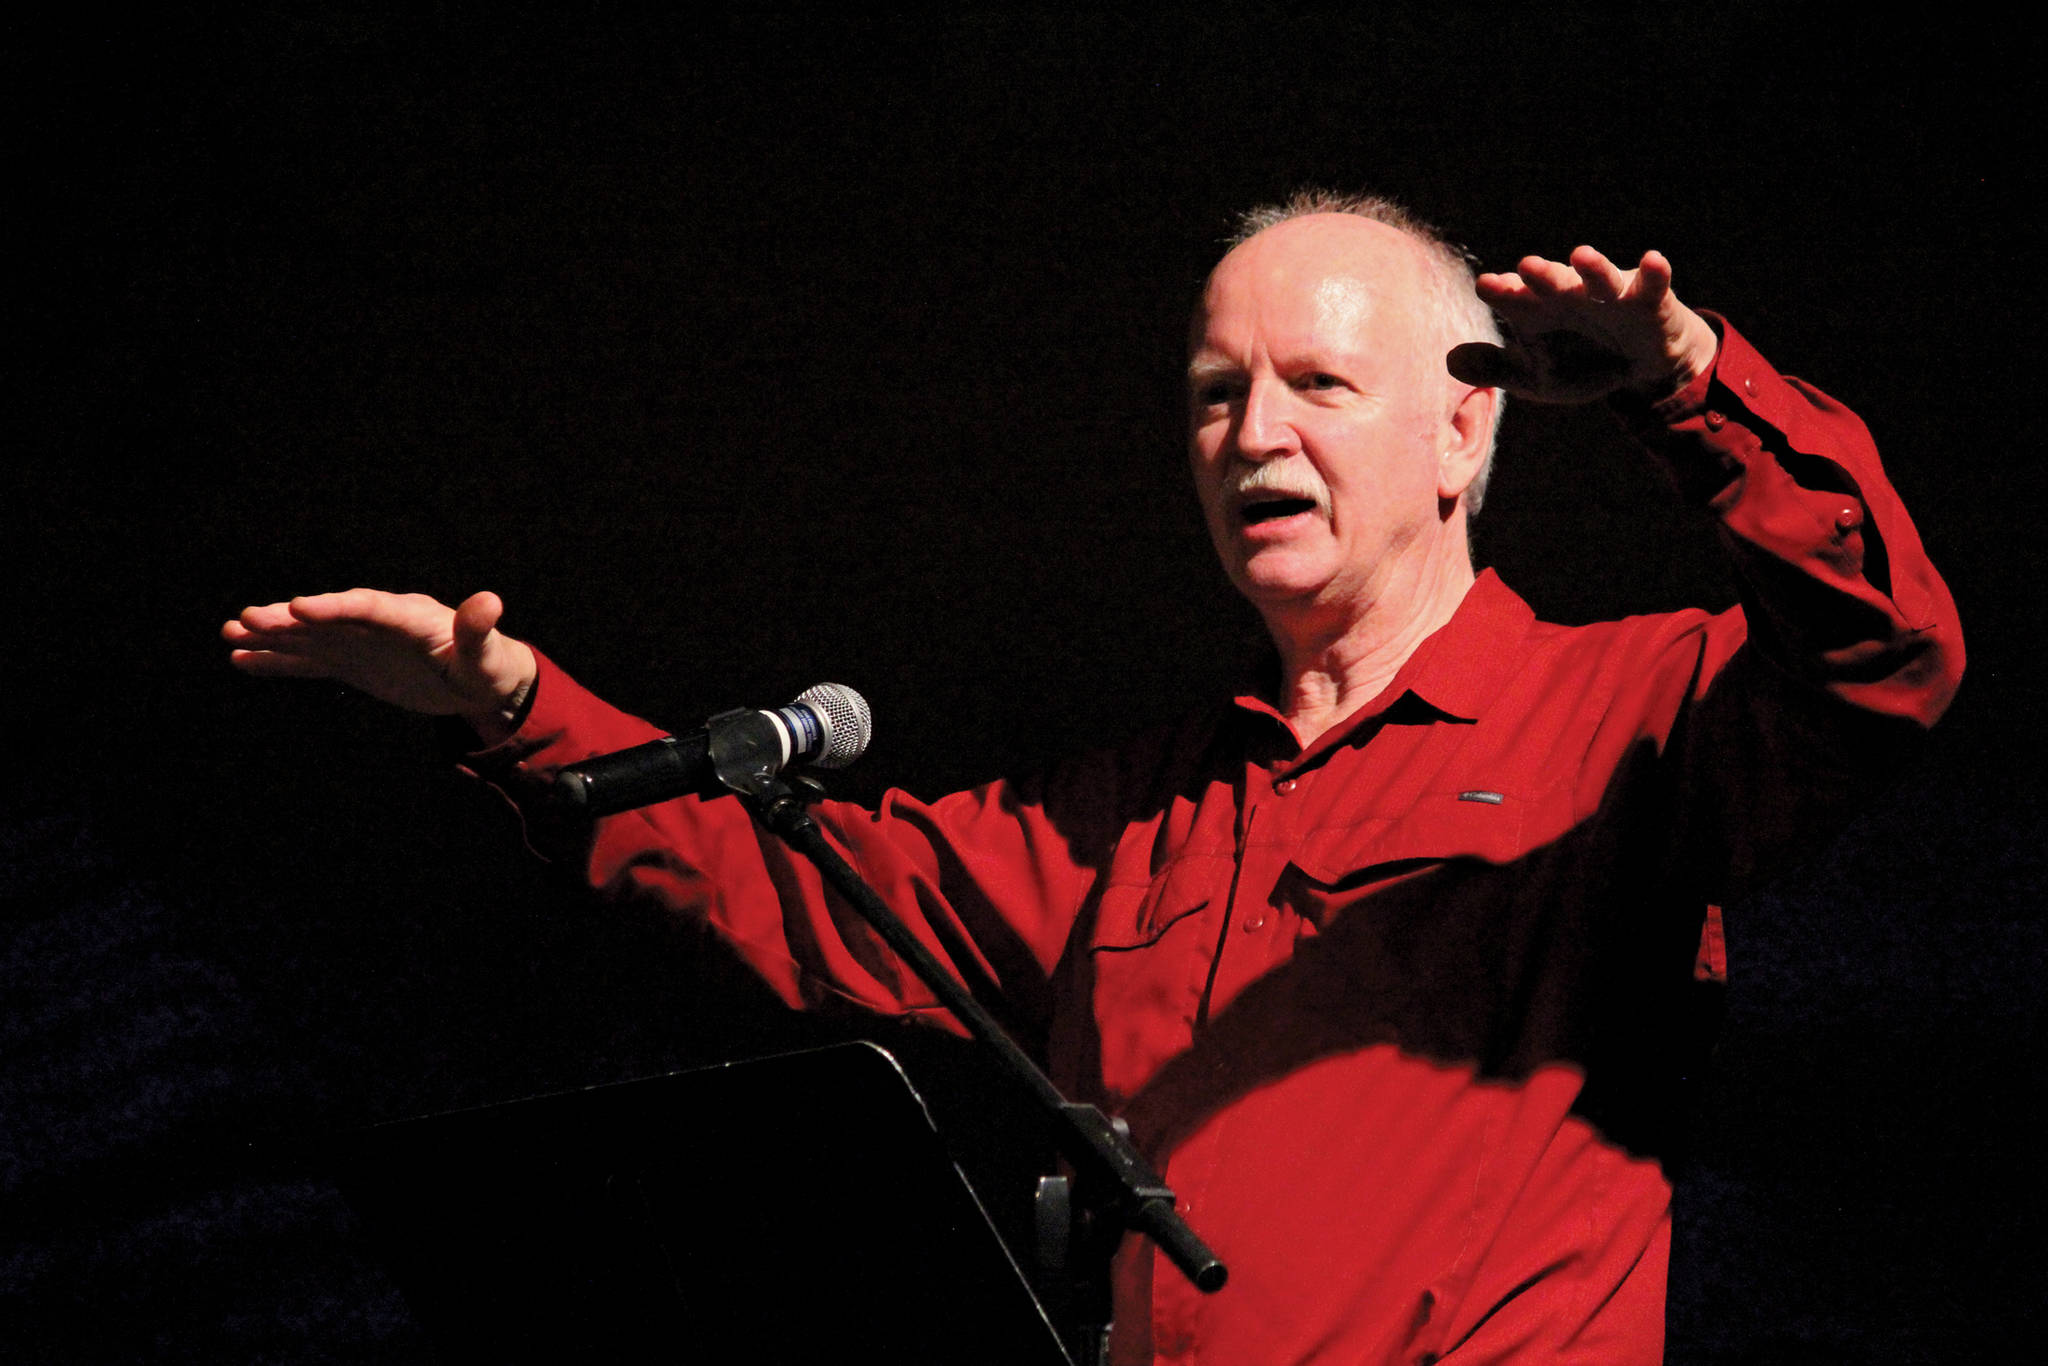 Robert Purcell tells a story about Gary Thomas, a Homer man who was killed last week in a water heater explosion, during a memorial for him Sunday, Jan. 19, 2020 at Homer Mariner Theatre at Homer High School in Homer, Alaska. (Photo by Megan Pacer/Homer News)